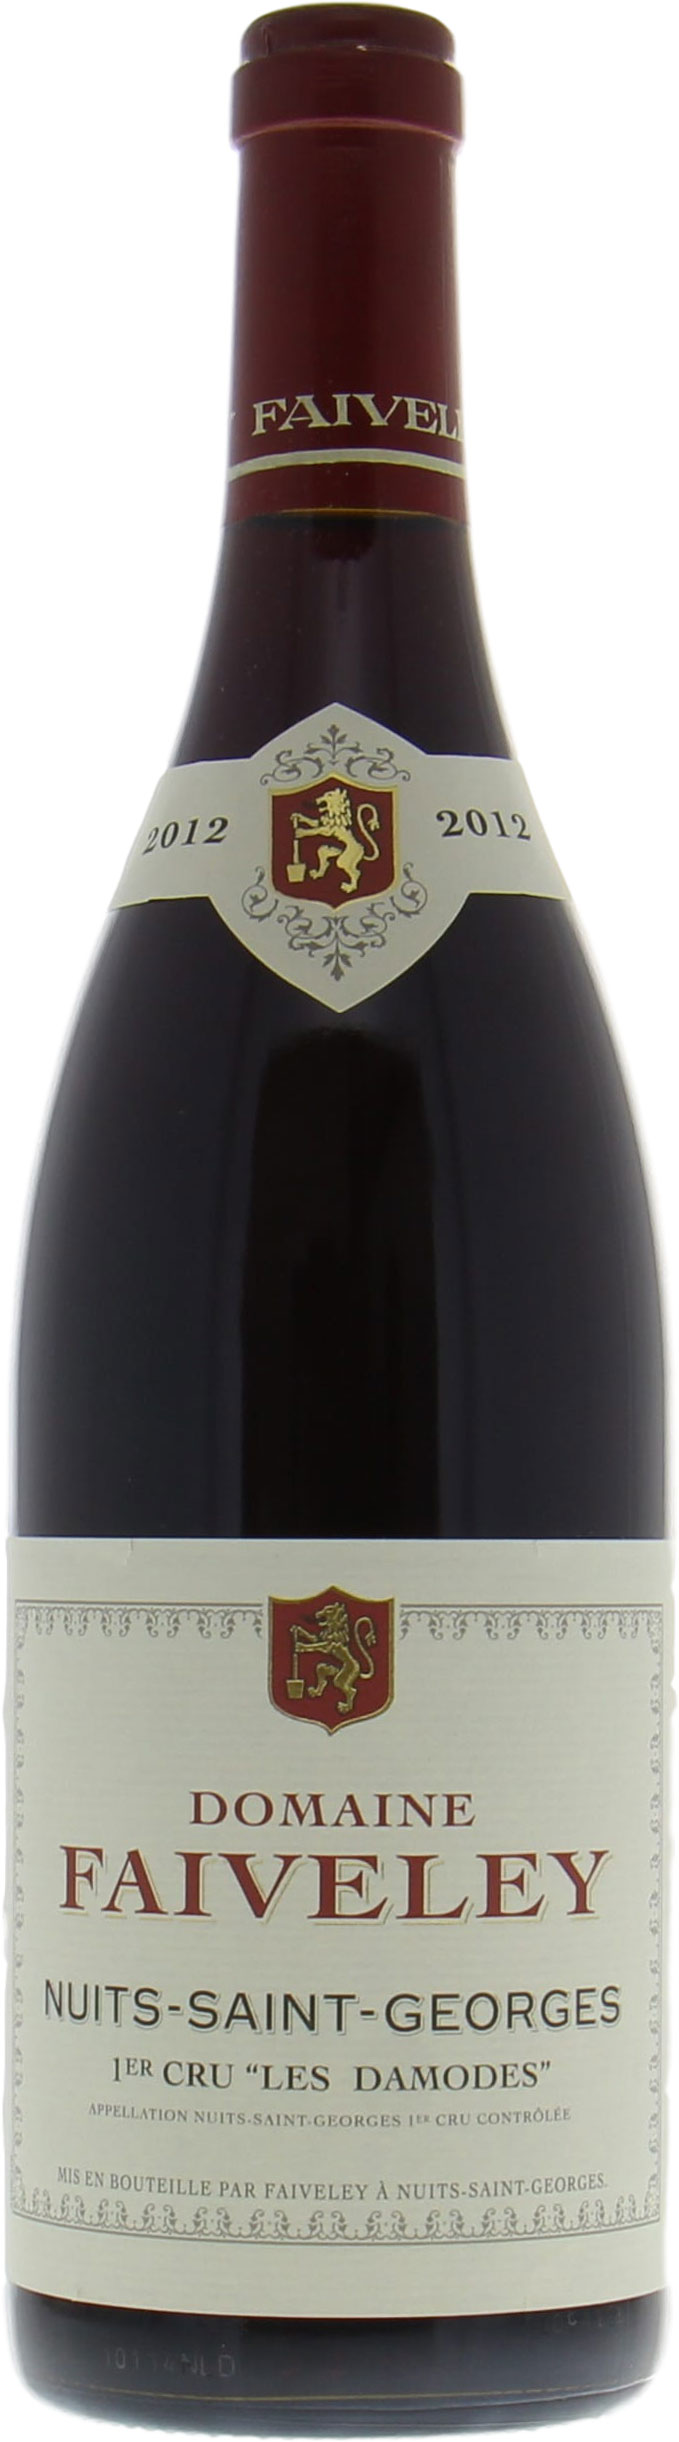 Faiveley - Nuits-St.-Georges Les Damodes 2012 Perfect